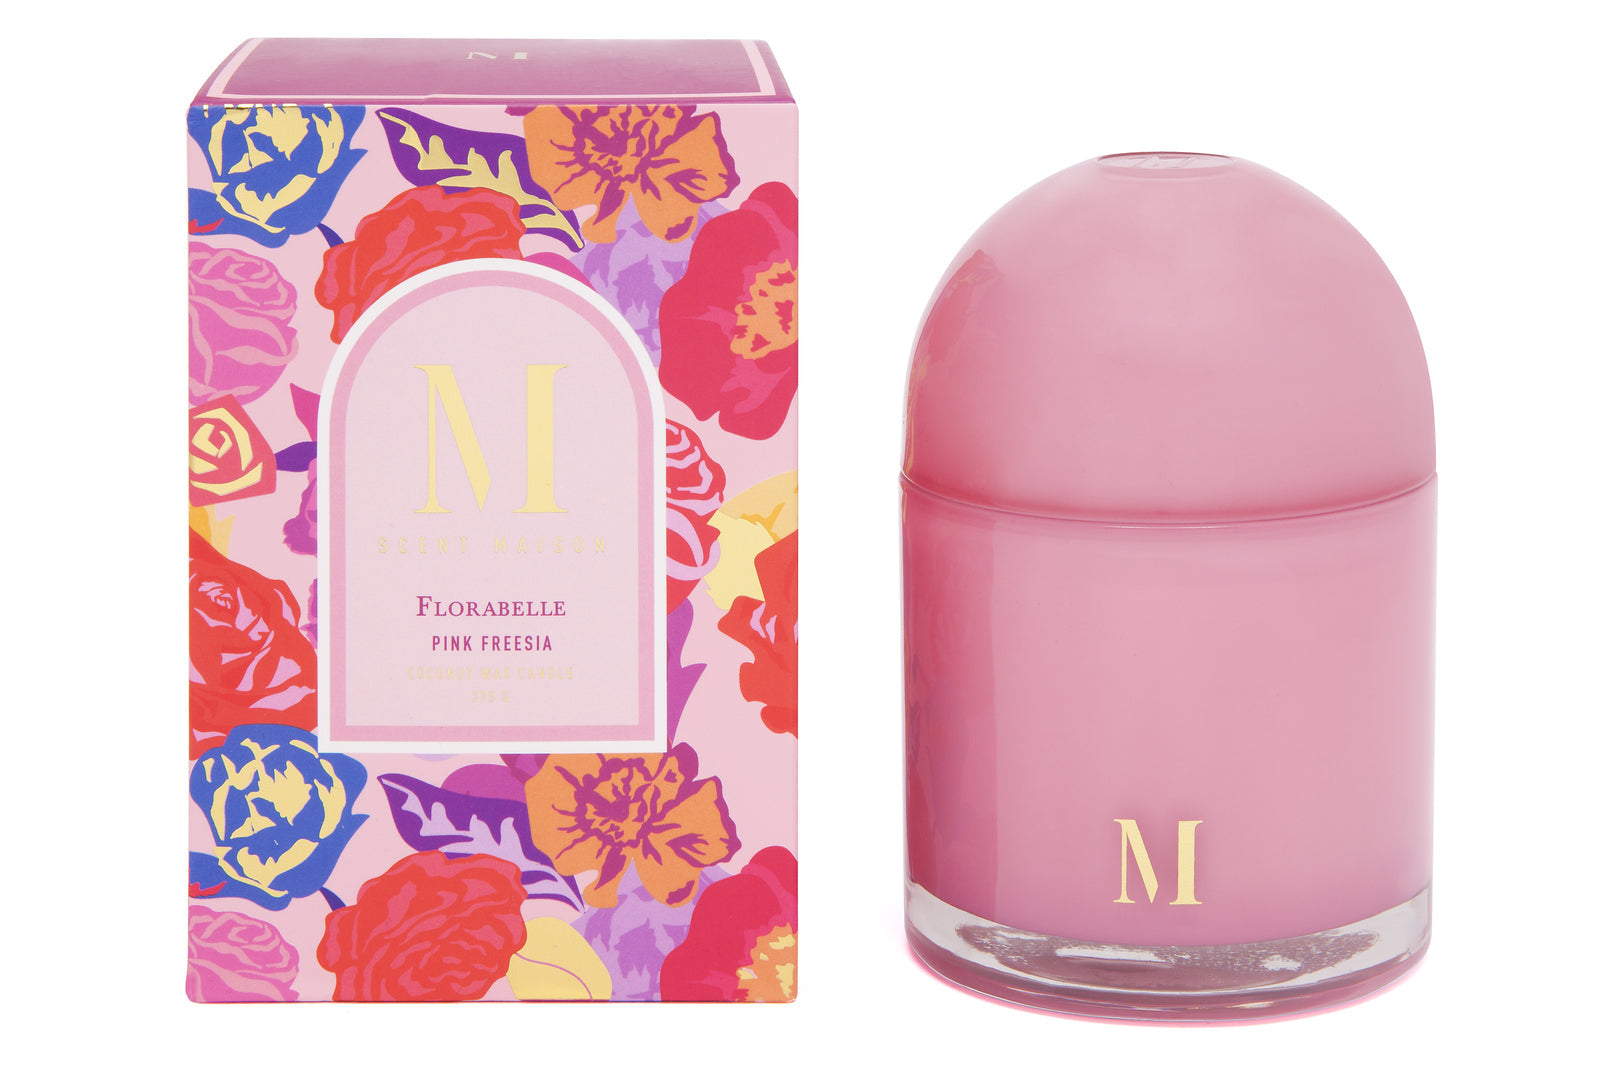 Scent Maison Florabelle Range Candle - Pink Freesia